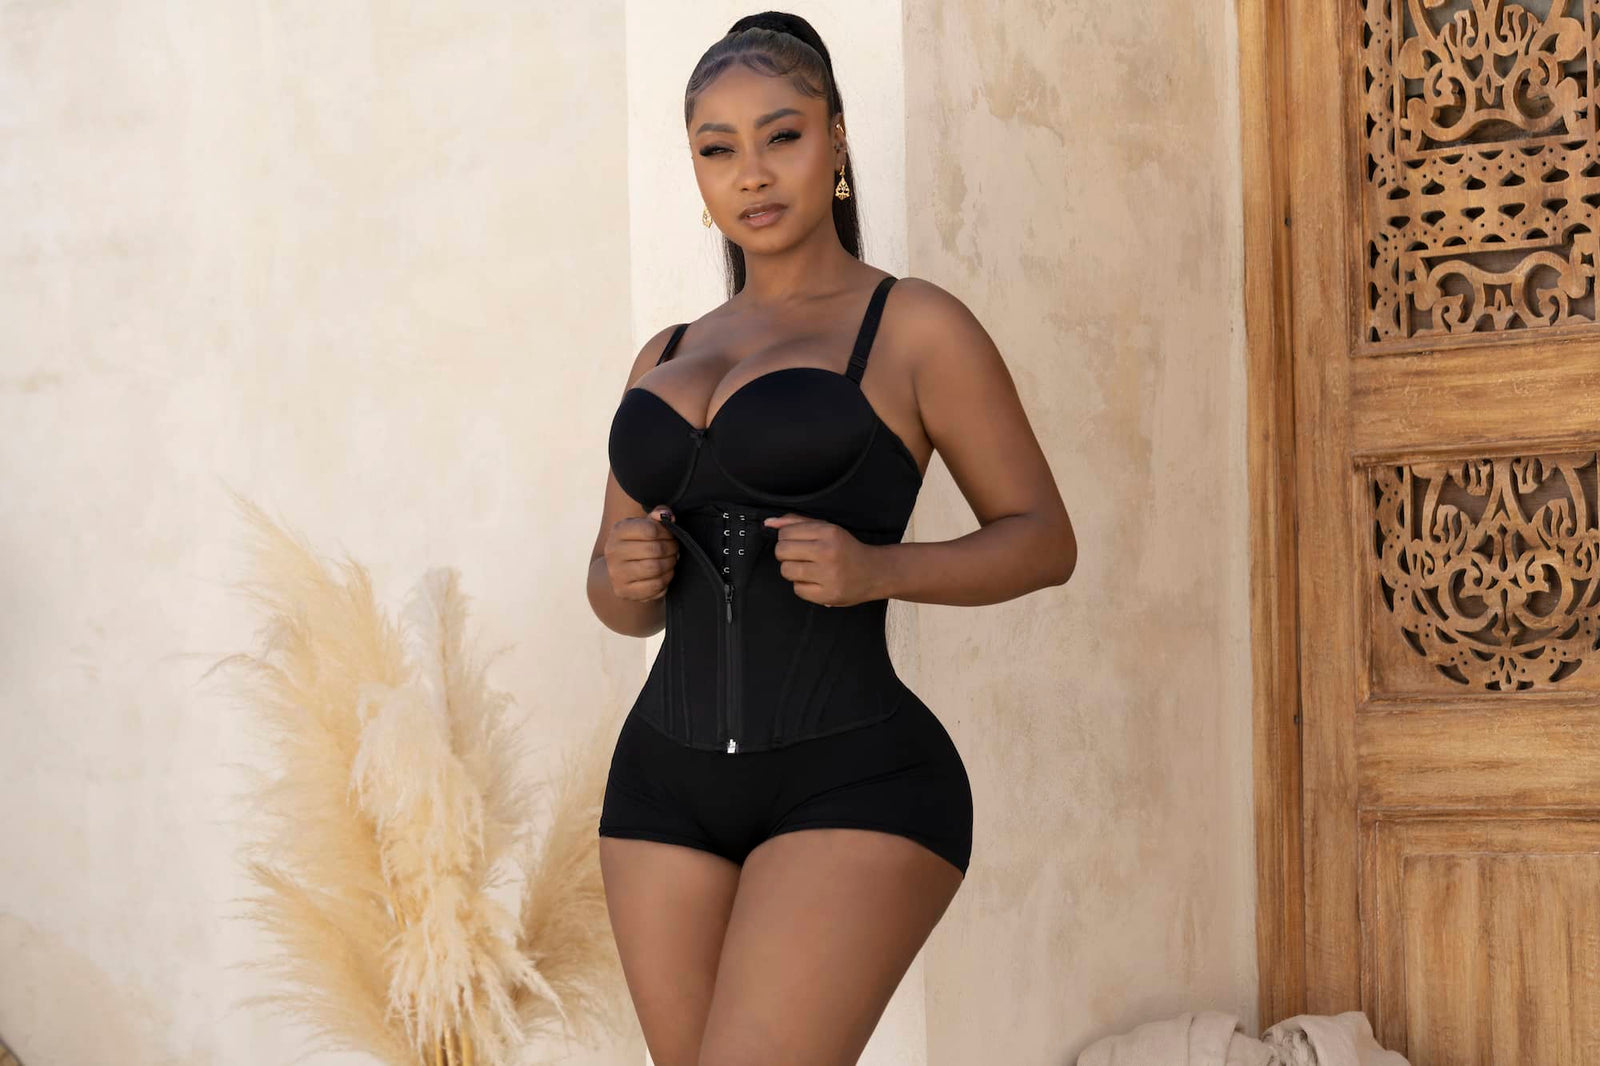 Slay in any outfit with our best selling Smoothing Seamless Bodysuit S